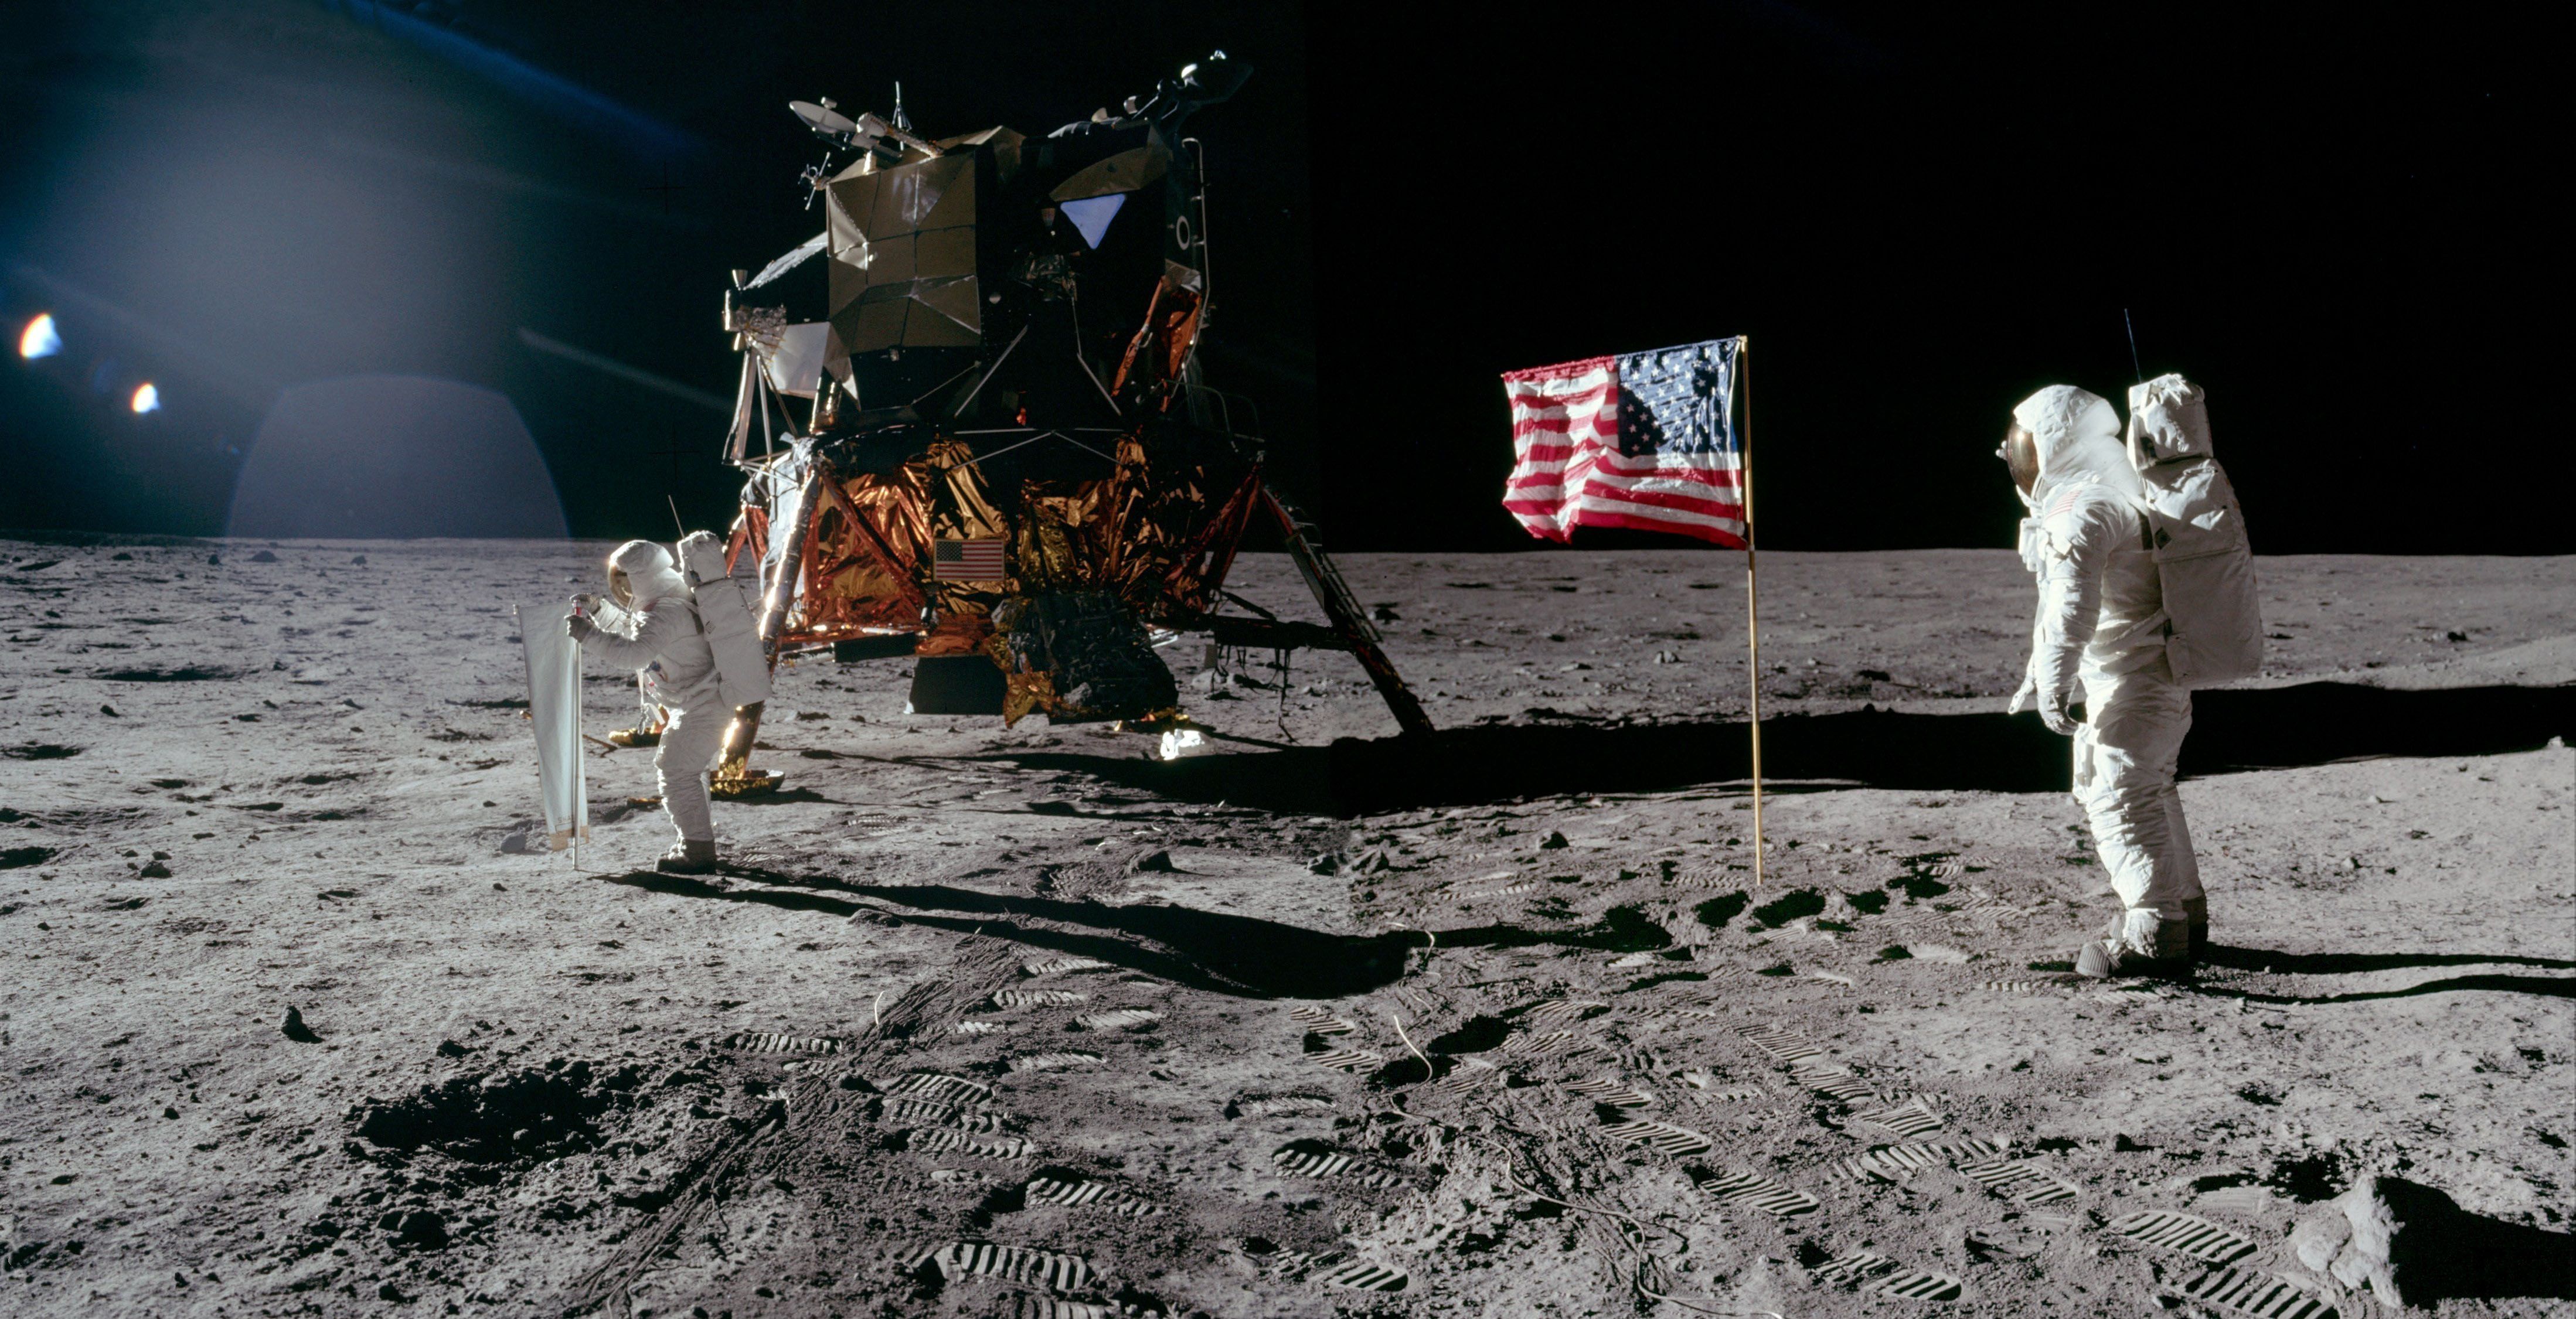 The best wallpapers of the Apollo 11 mission in 4k and other curiosities